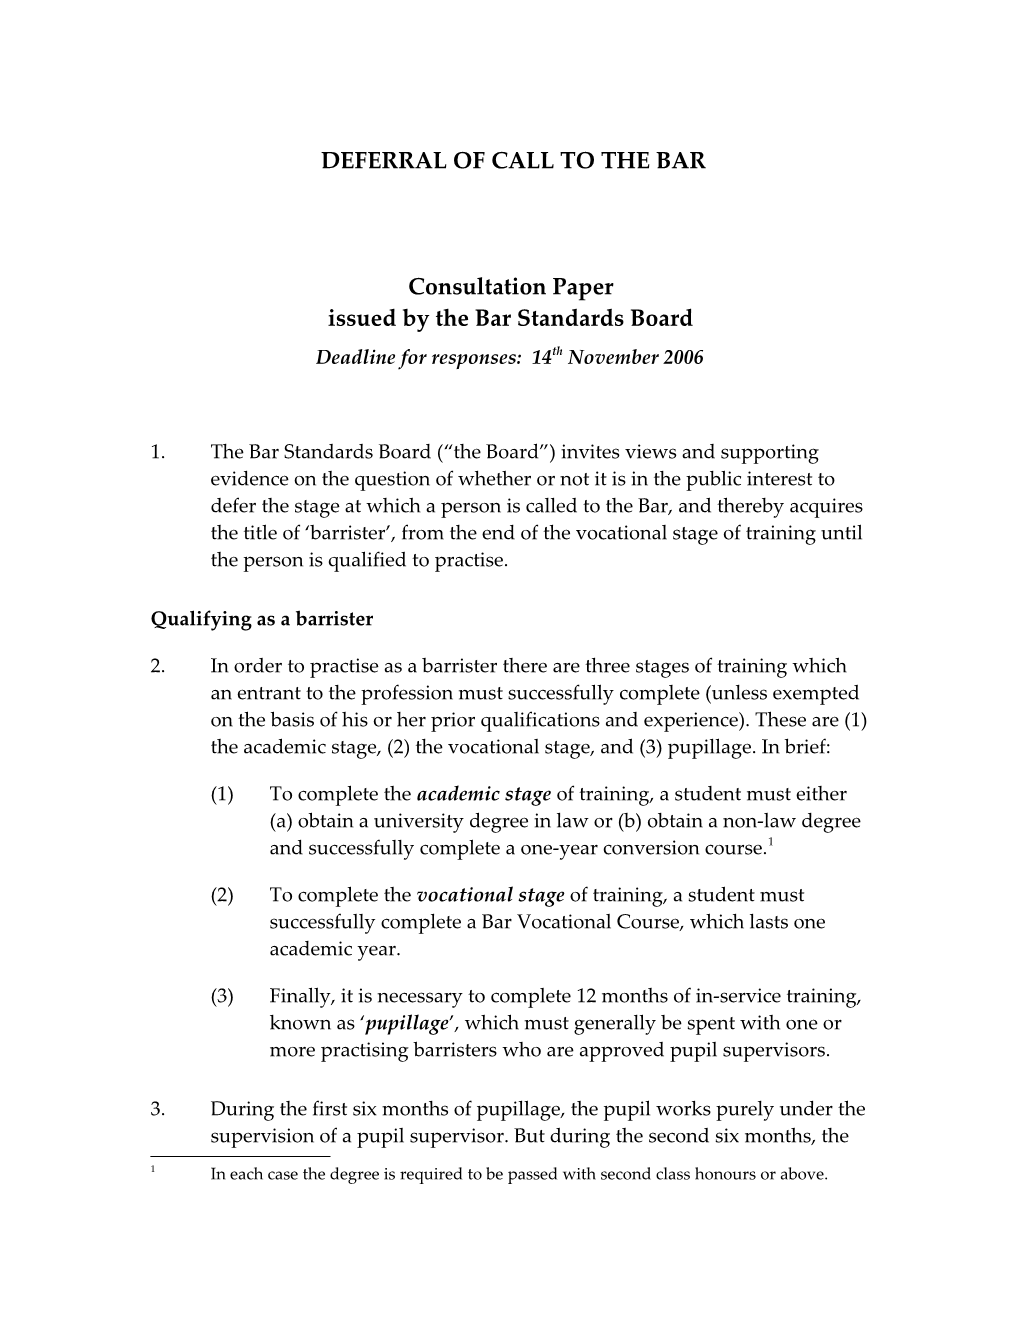 Deferral of Call to the Bar